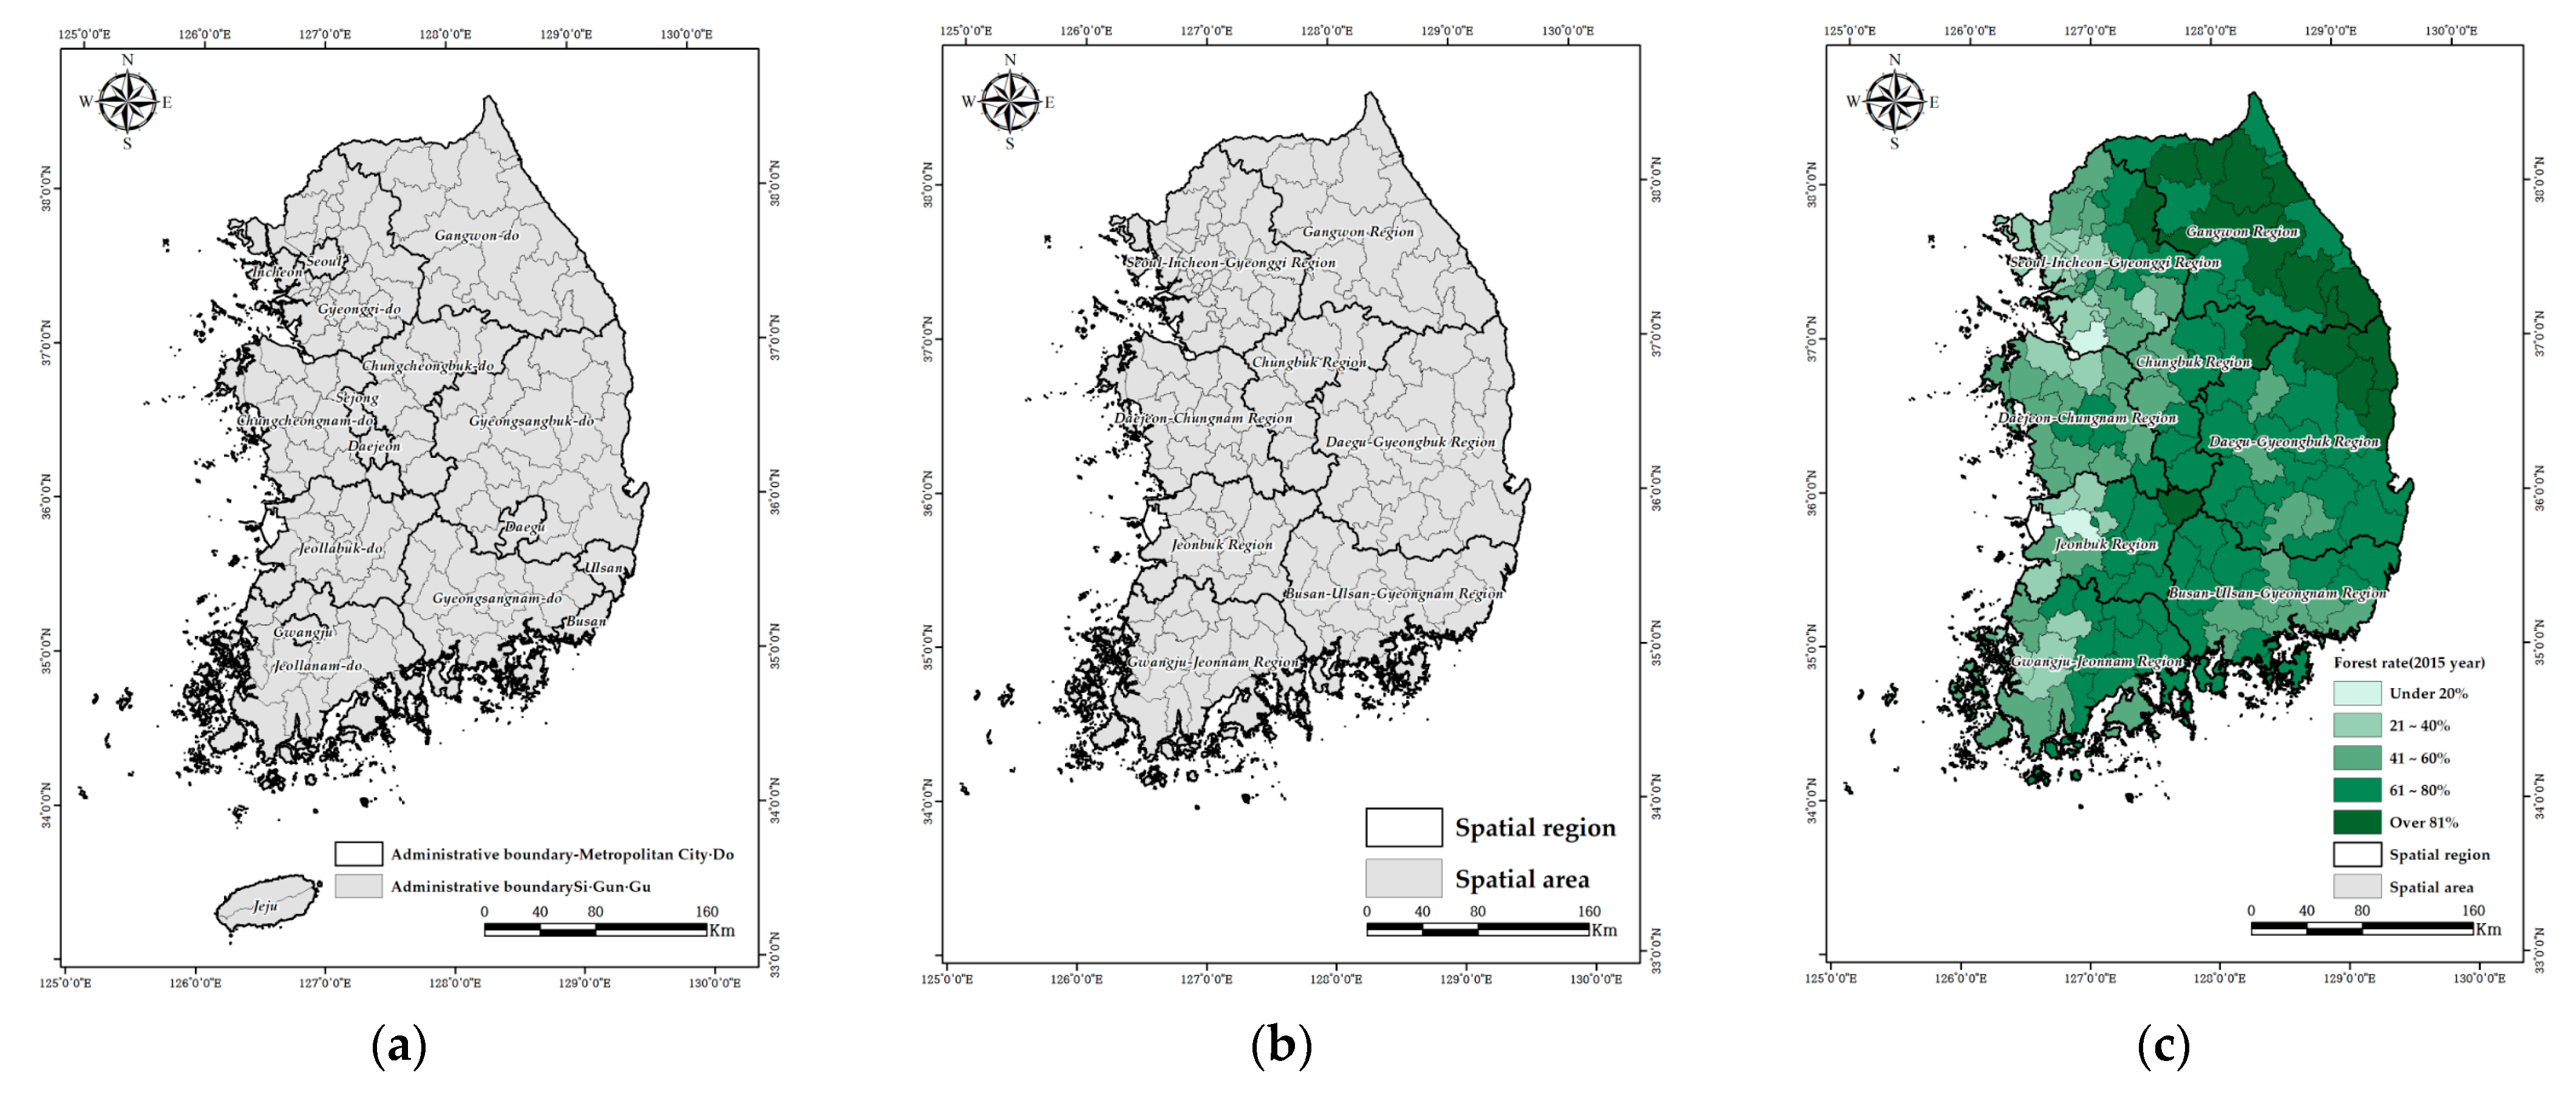 Forests | Free Full-Text | Analysis of Factors Influencing Forest Loss in  South Korea: Statistical Models and Machine-Learning Model | HTML